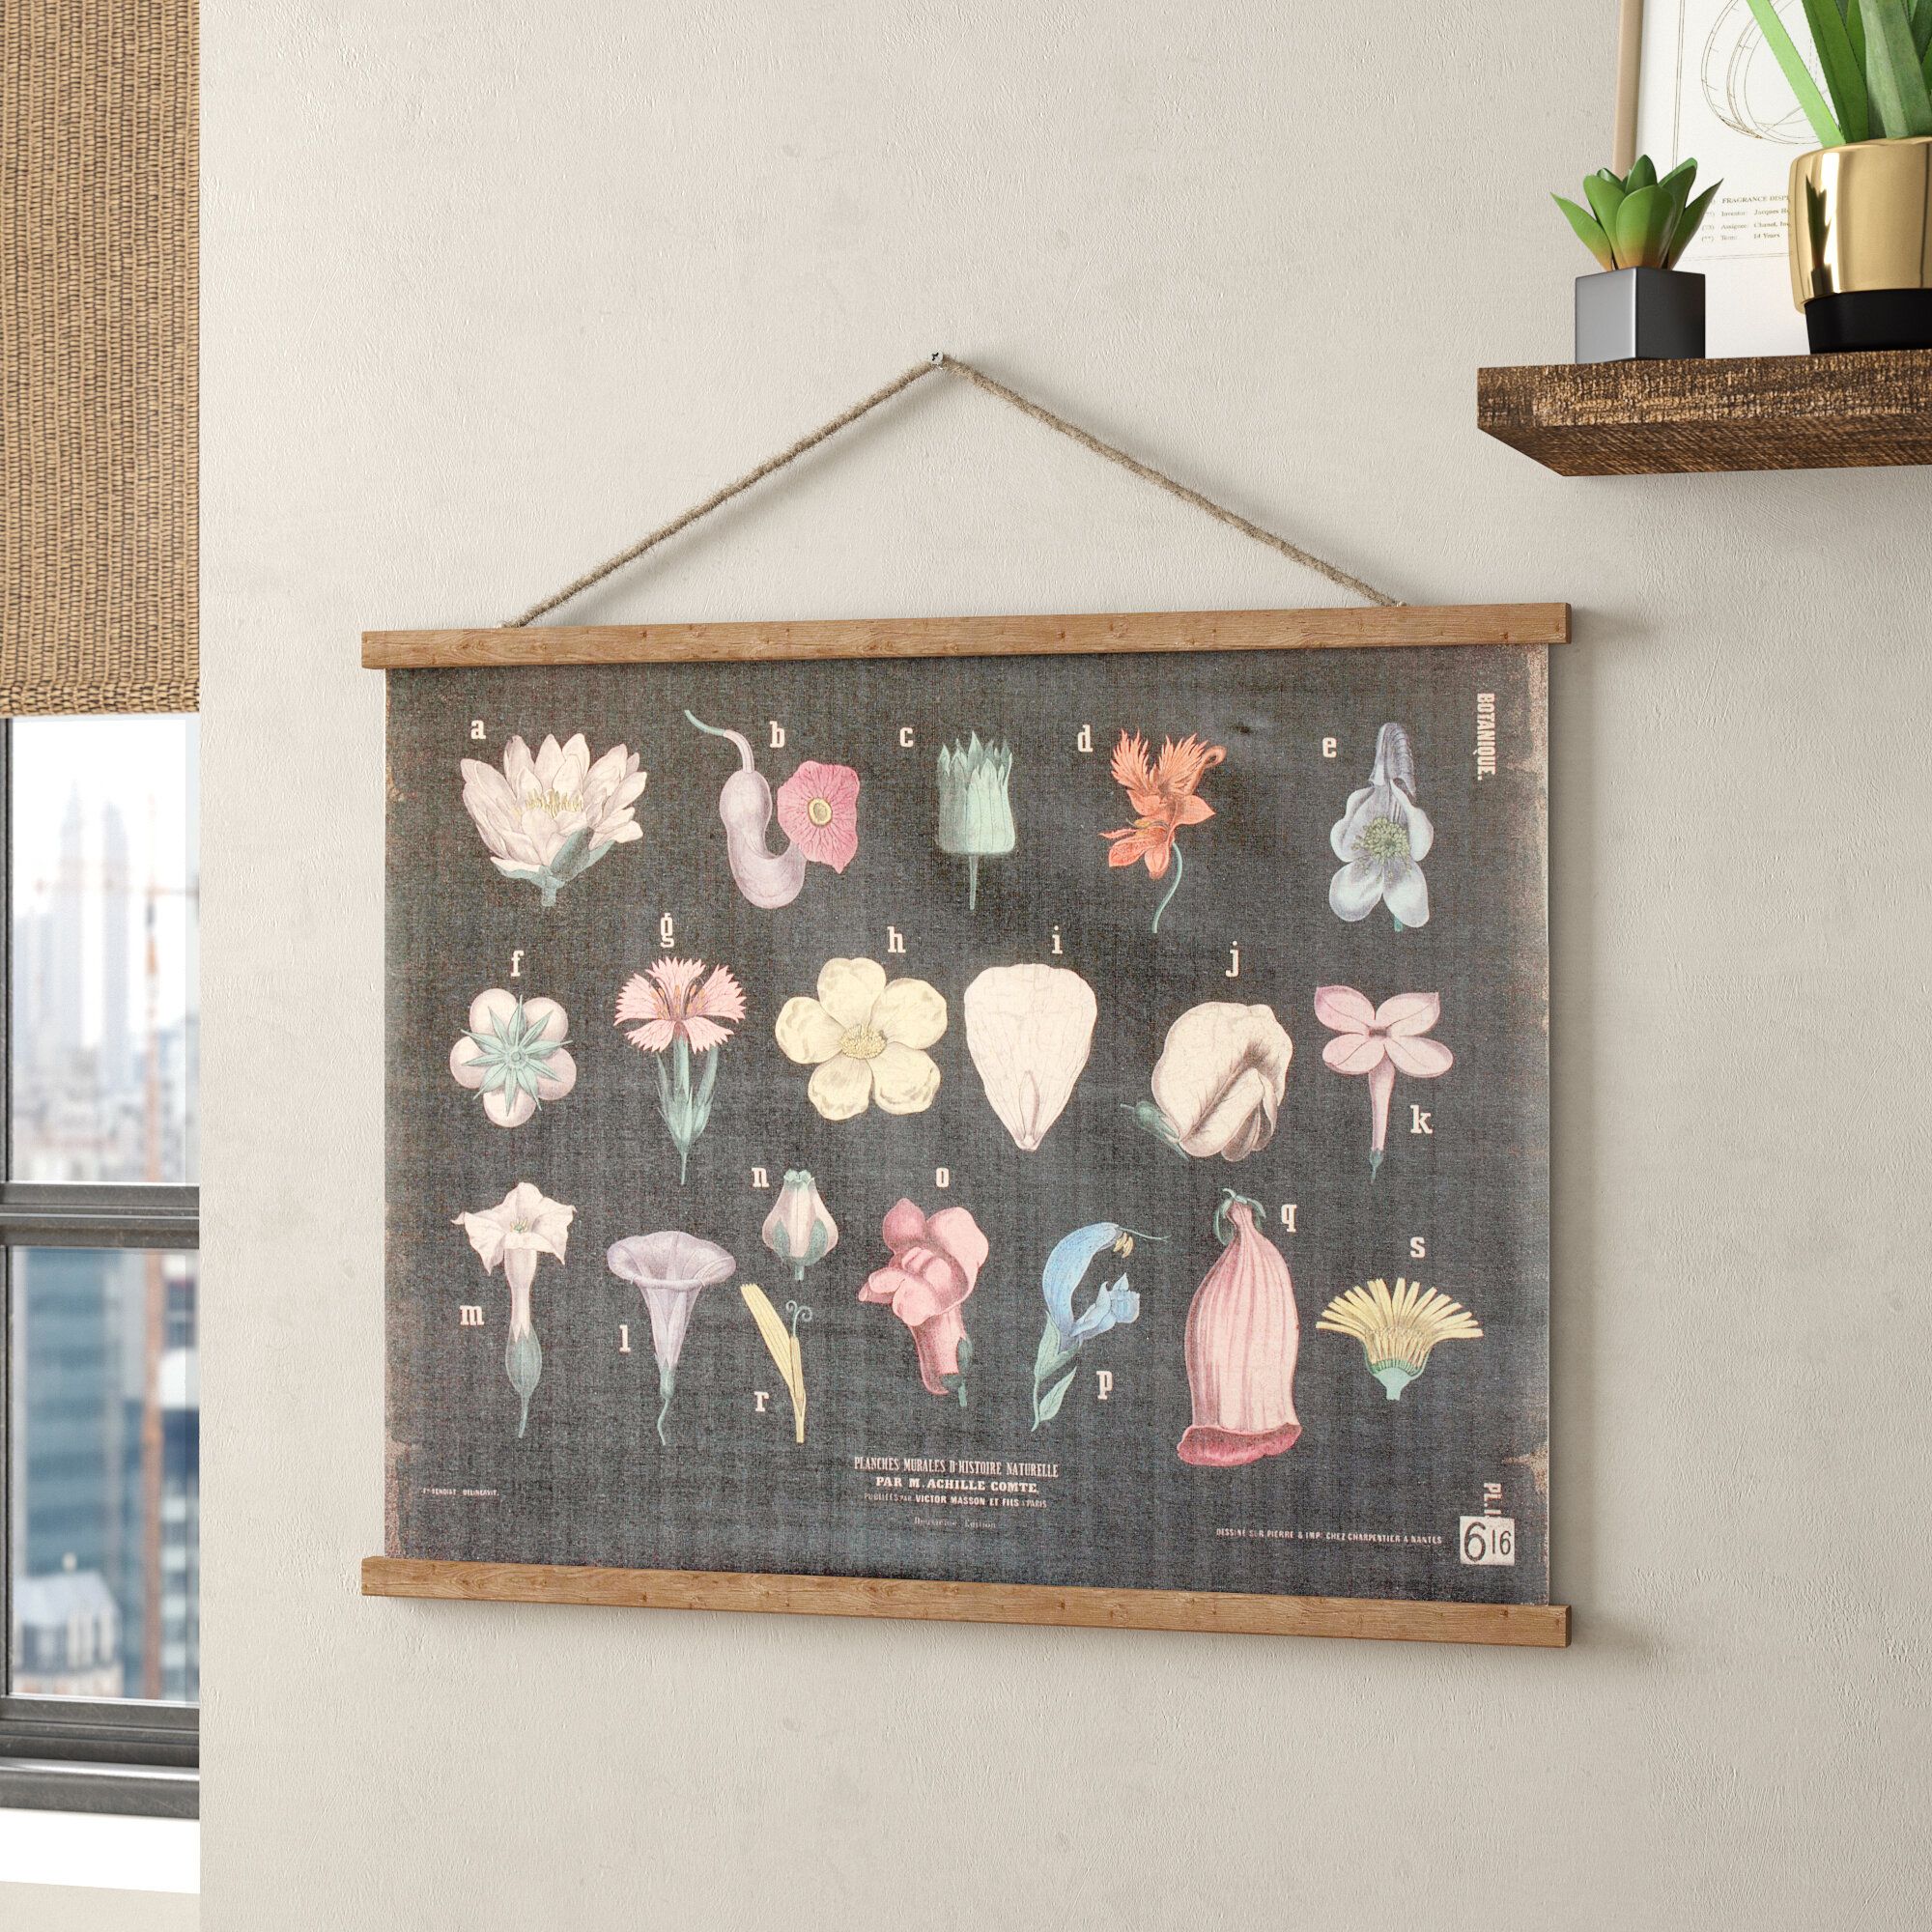 Wayfair | Wall Hanging Tapestries You'll Love In 2021 Inside 2017 Blended Fabric Ranier Wall Hangings With Hanging Accessories Included (View 13 of 20)